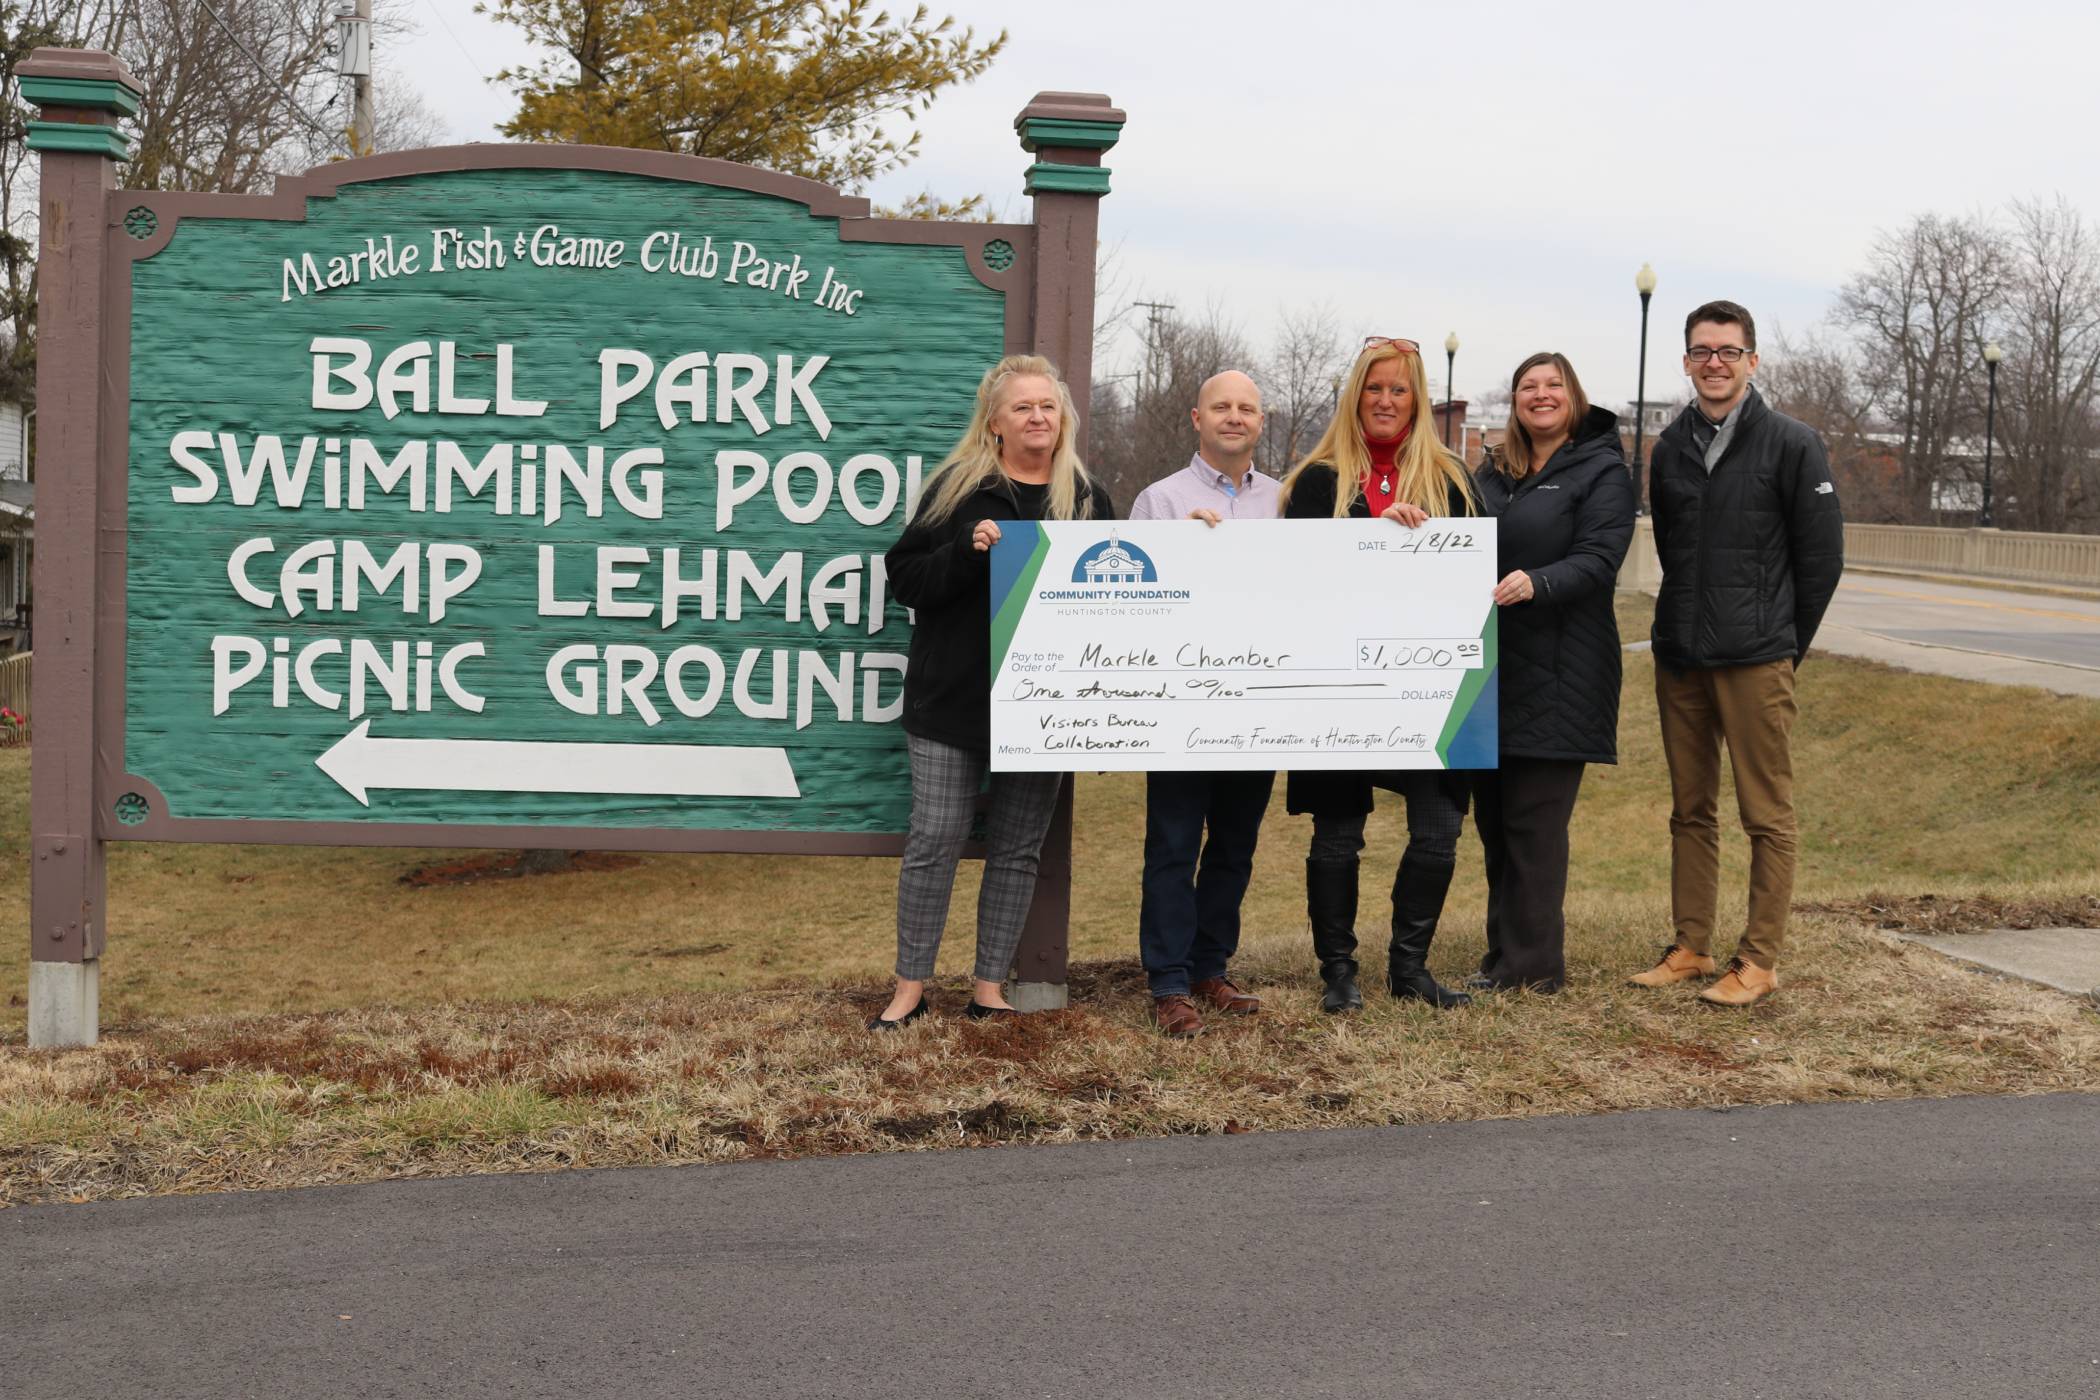 Five people holding a donation check from the Markle Fish and Game Club park in front of their sign